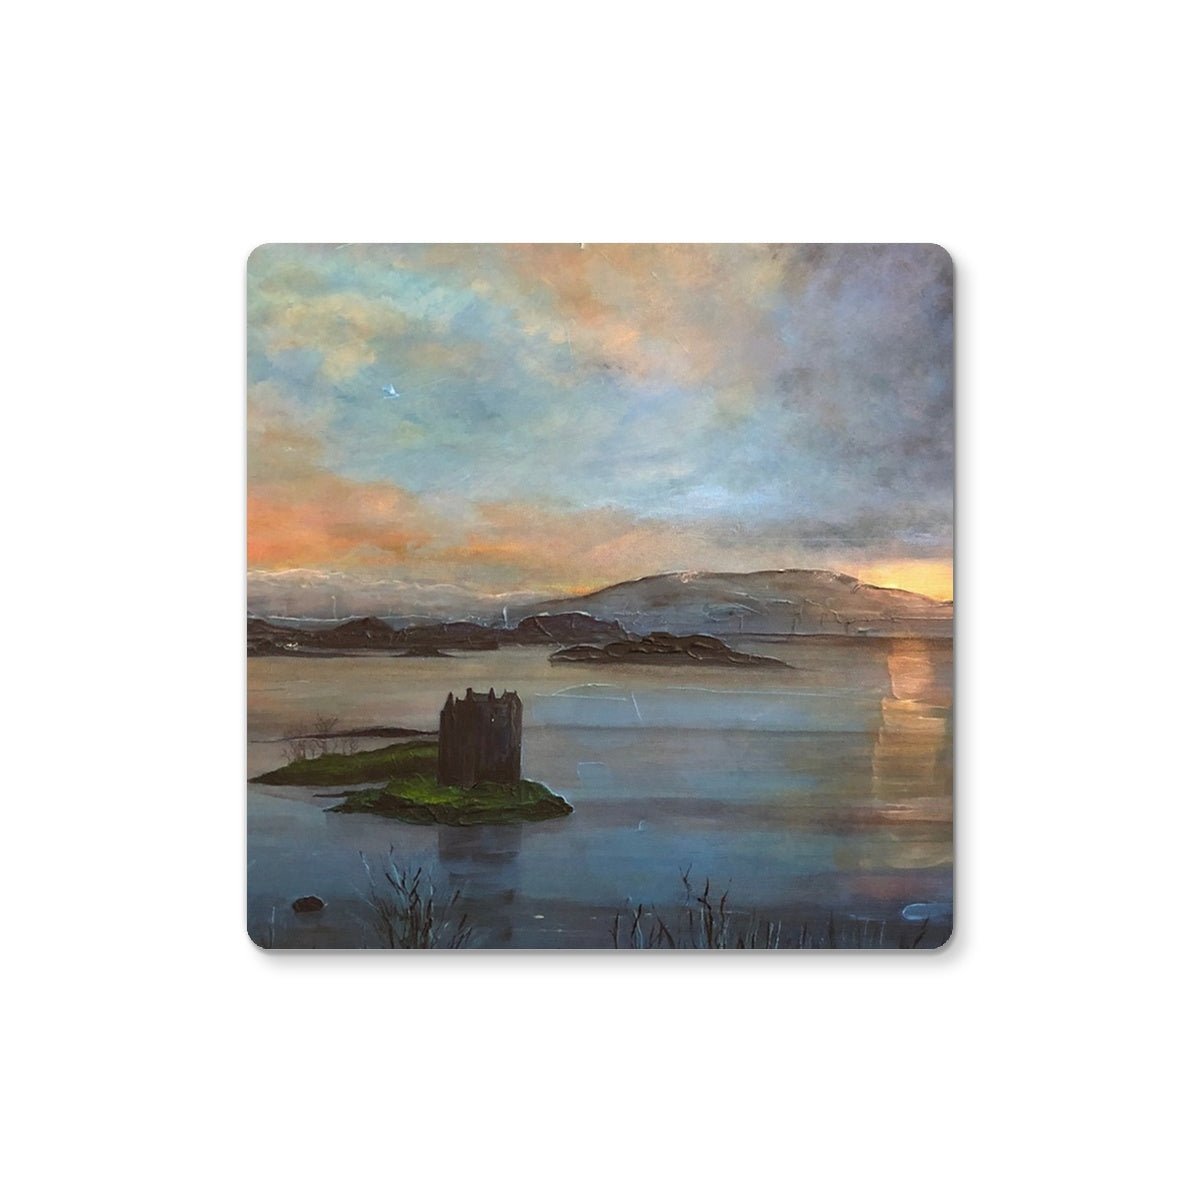 Castle Stalker Twilight Art Gift Coaster-Coasters-Scottish Castles Art Gallery-6 Coasters-Paintings, Prints, Homeware, Art Gifts From Scotland By Scottish Artist Kevin Hunter